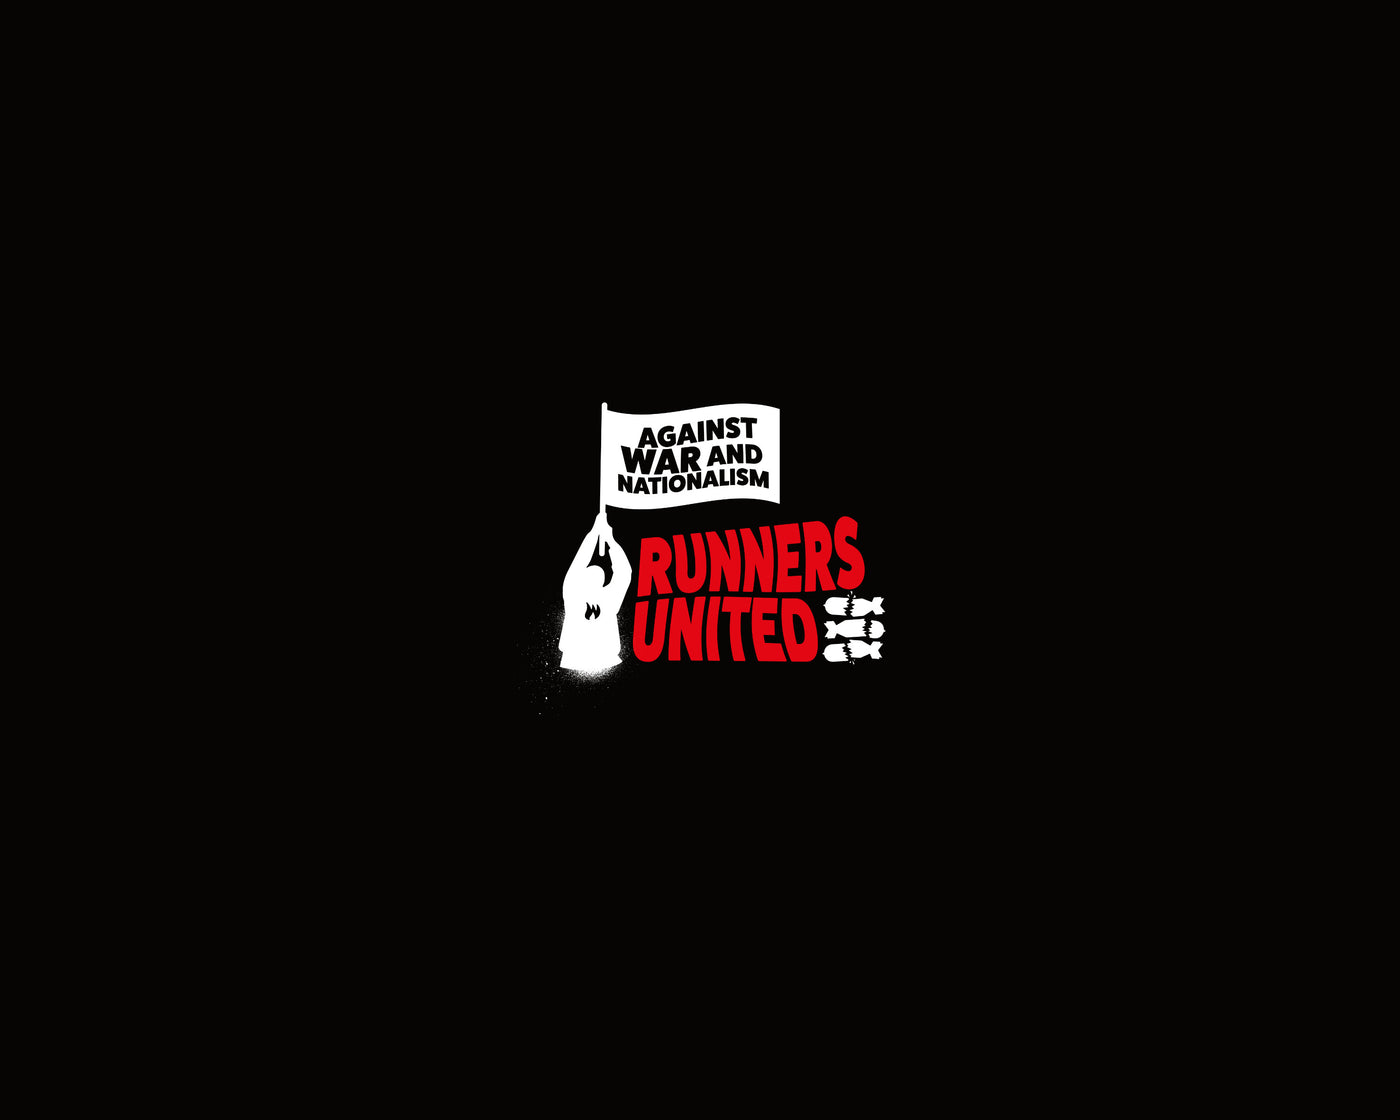 Runners United - Against War & Nationalism